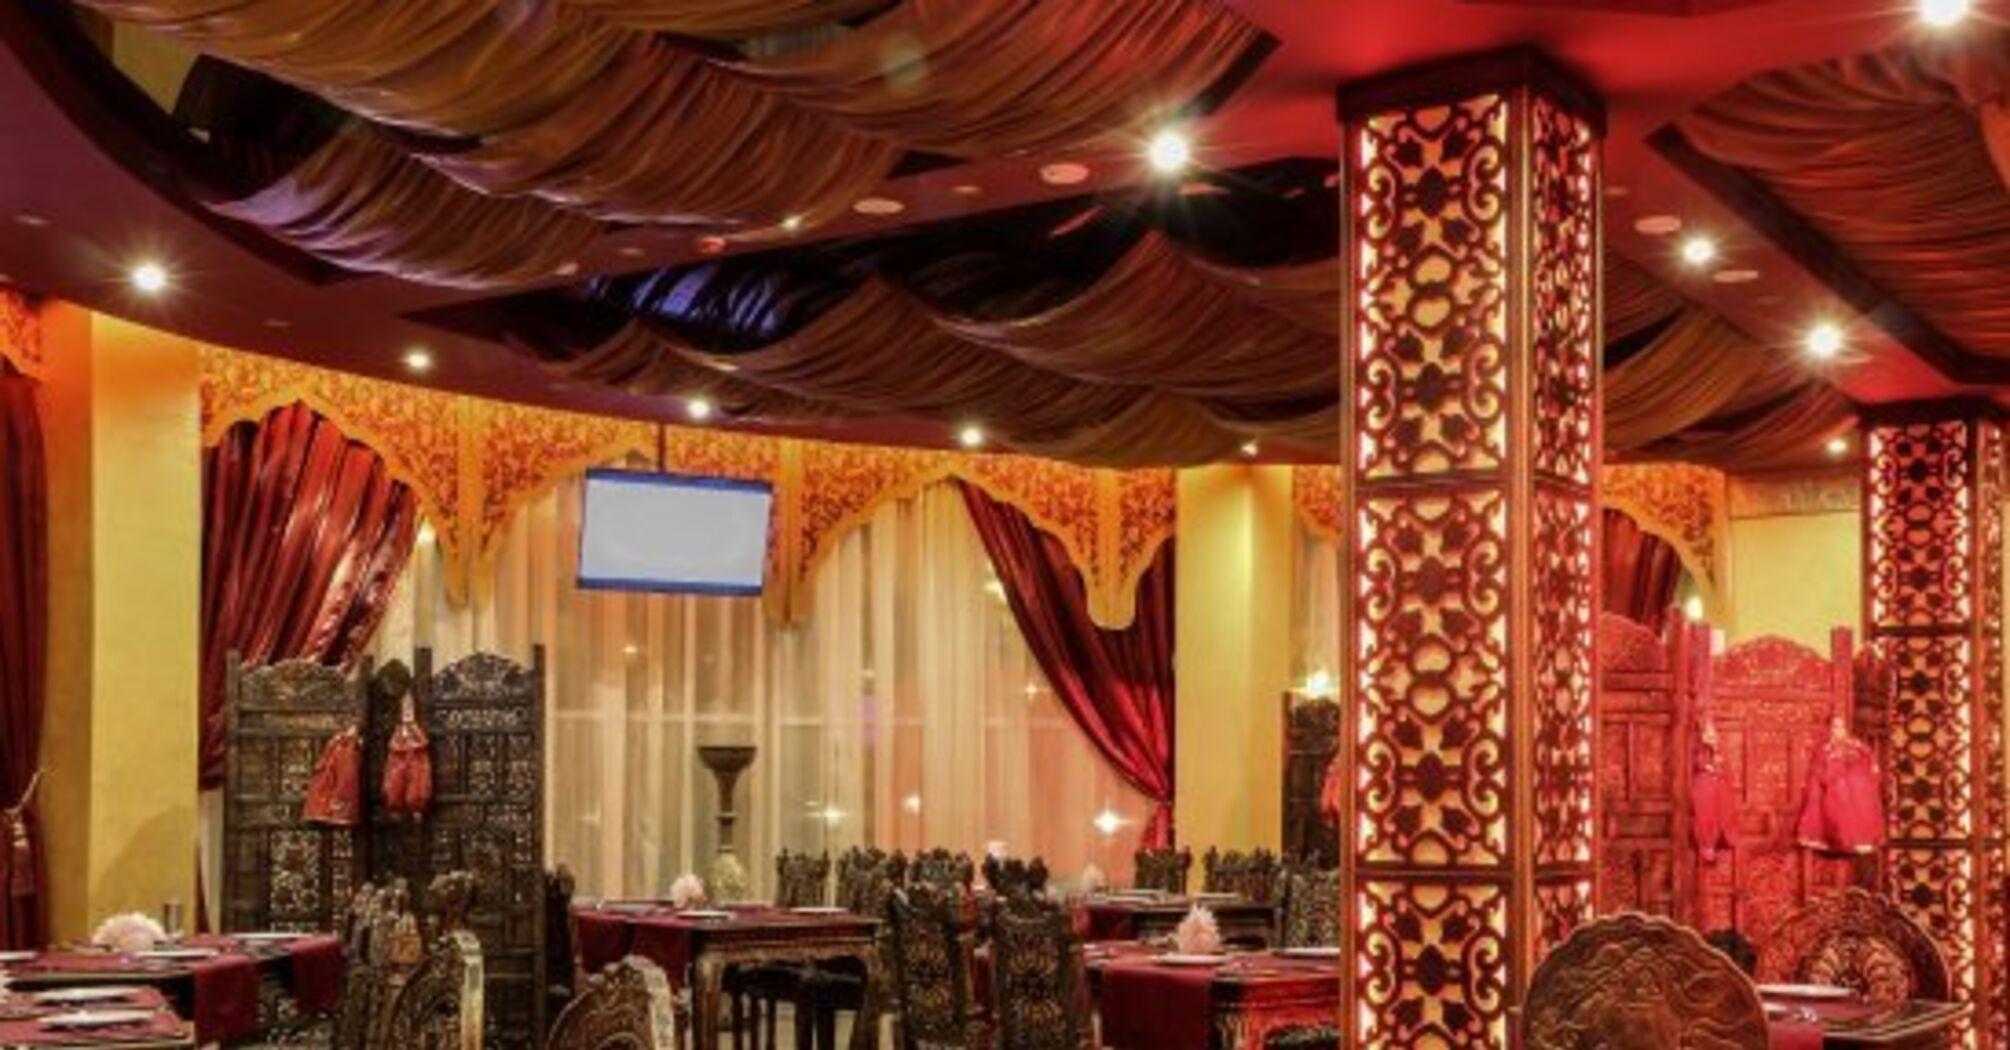 Top 9 best Indian and Nepali restaurants in the Tri-State area